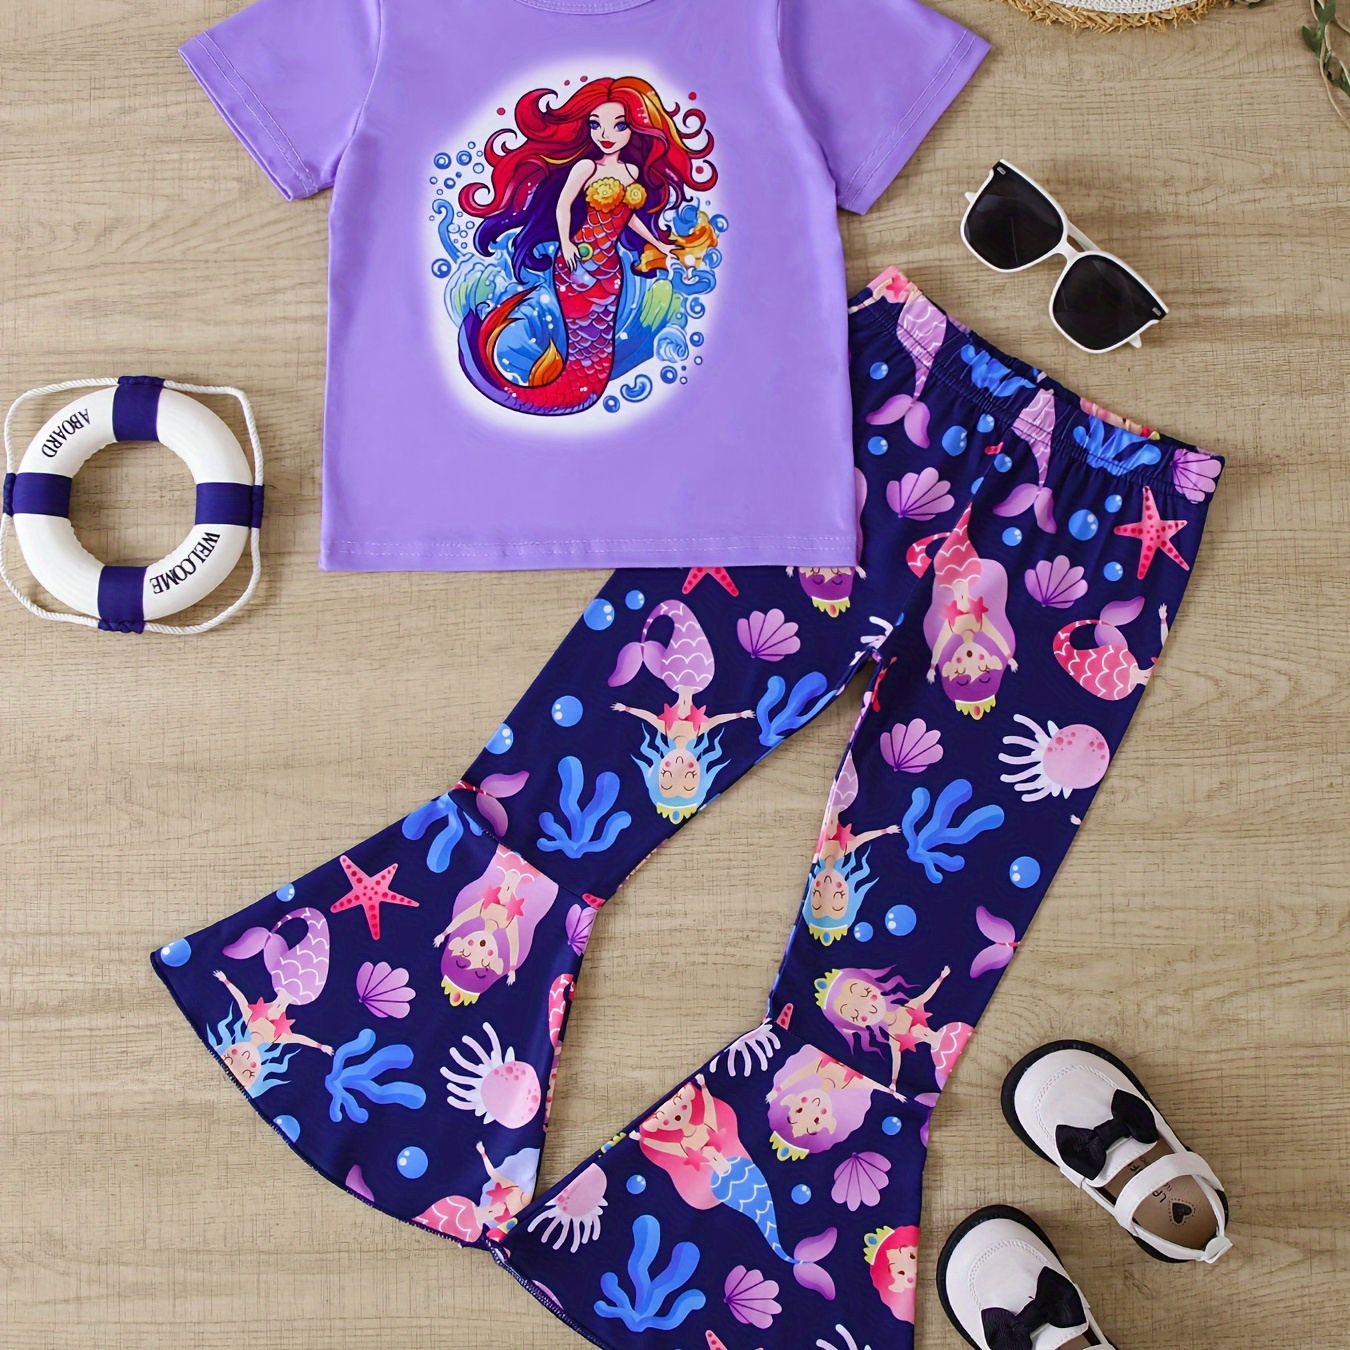 

Mermaid Print 2pcs Set Girls Comfy Outfits Spring Summer Party Gift